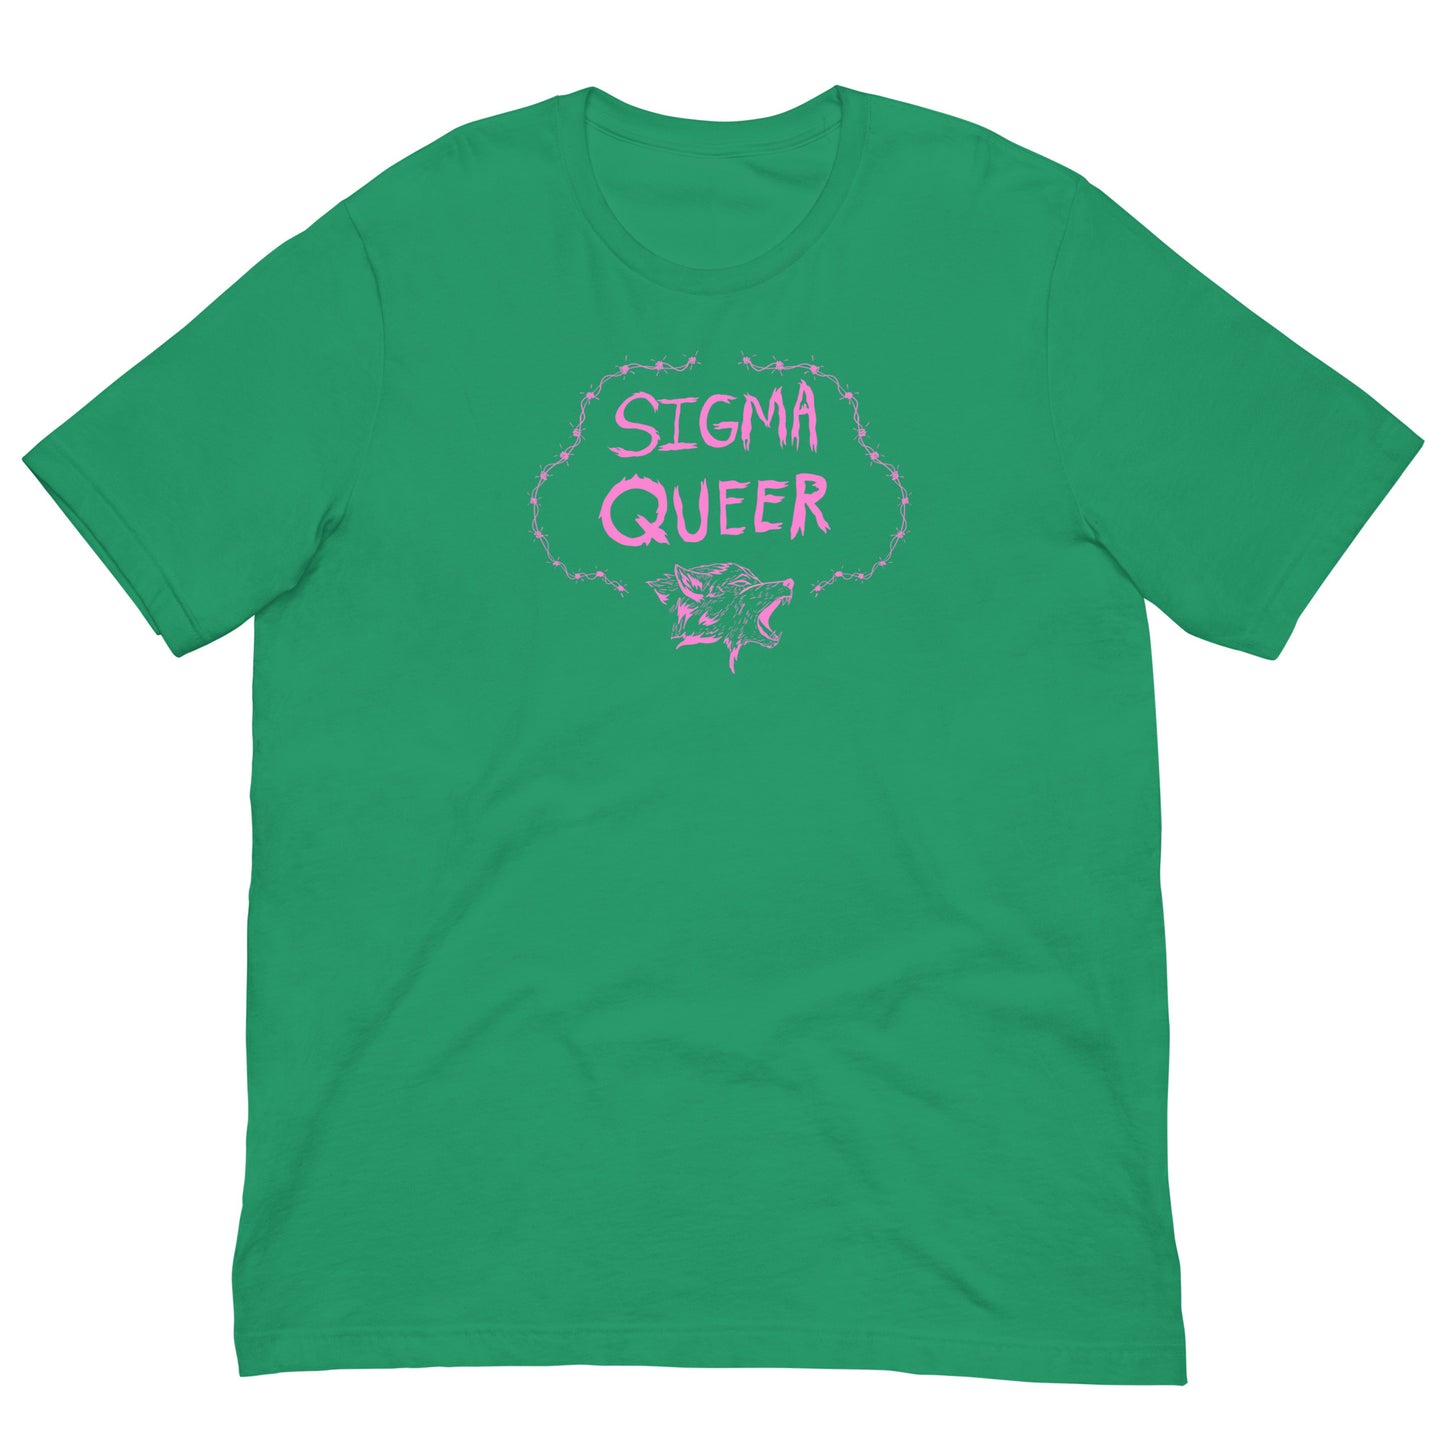 Sigma Queer Tee